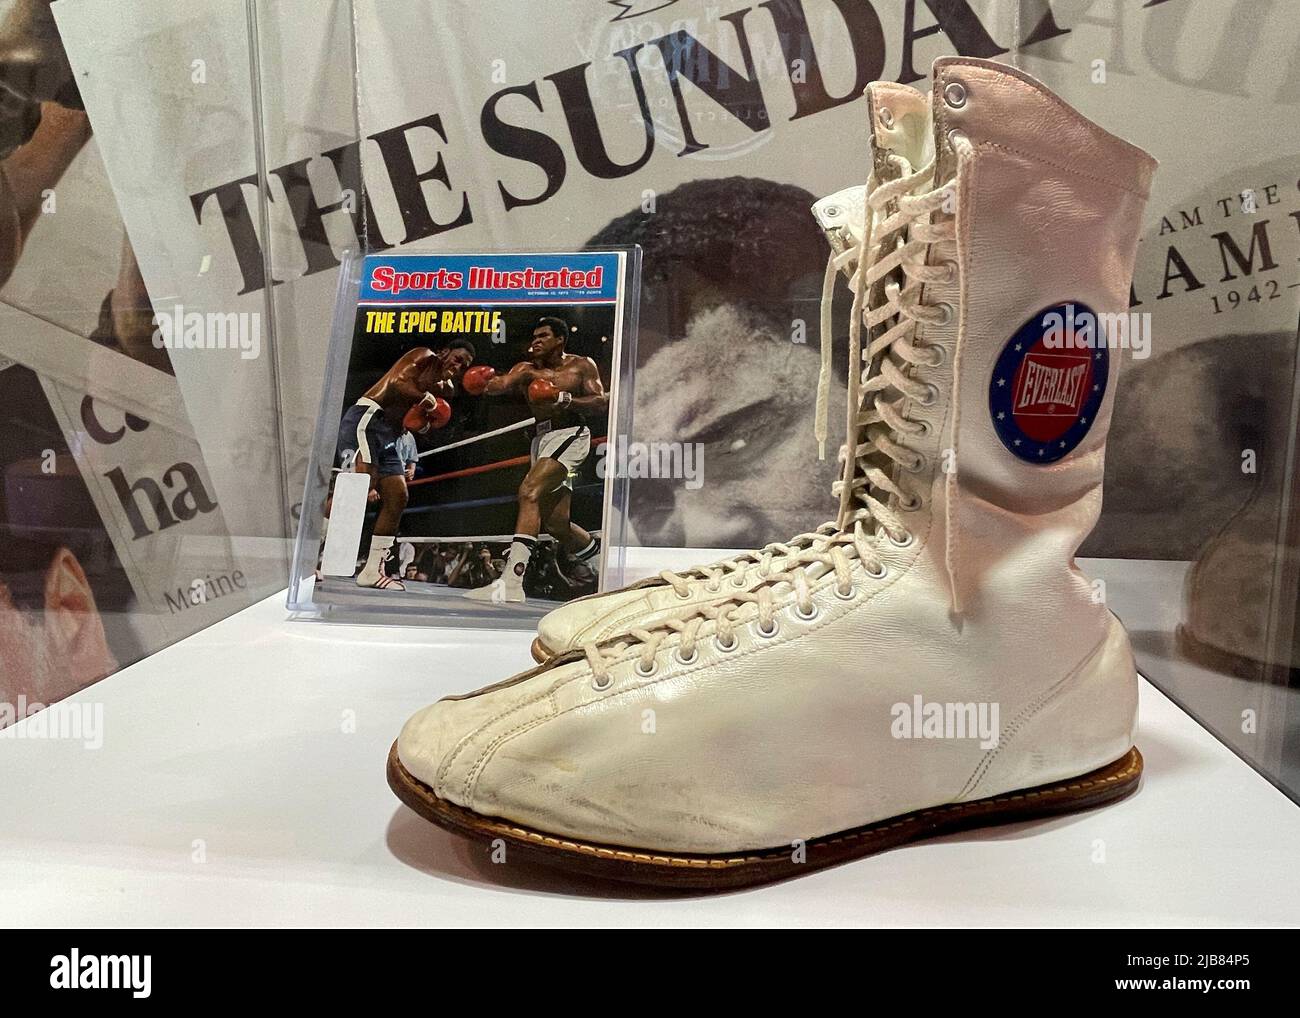 Boxing shoes worn by Muhammad Ali during the Thrilla in Manila, the final  boxing match between Muhammad Ali and Joe Frazier are displayed with  Billionaire Jim Irsay's private collection of American history